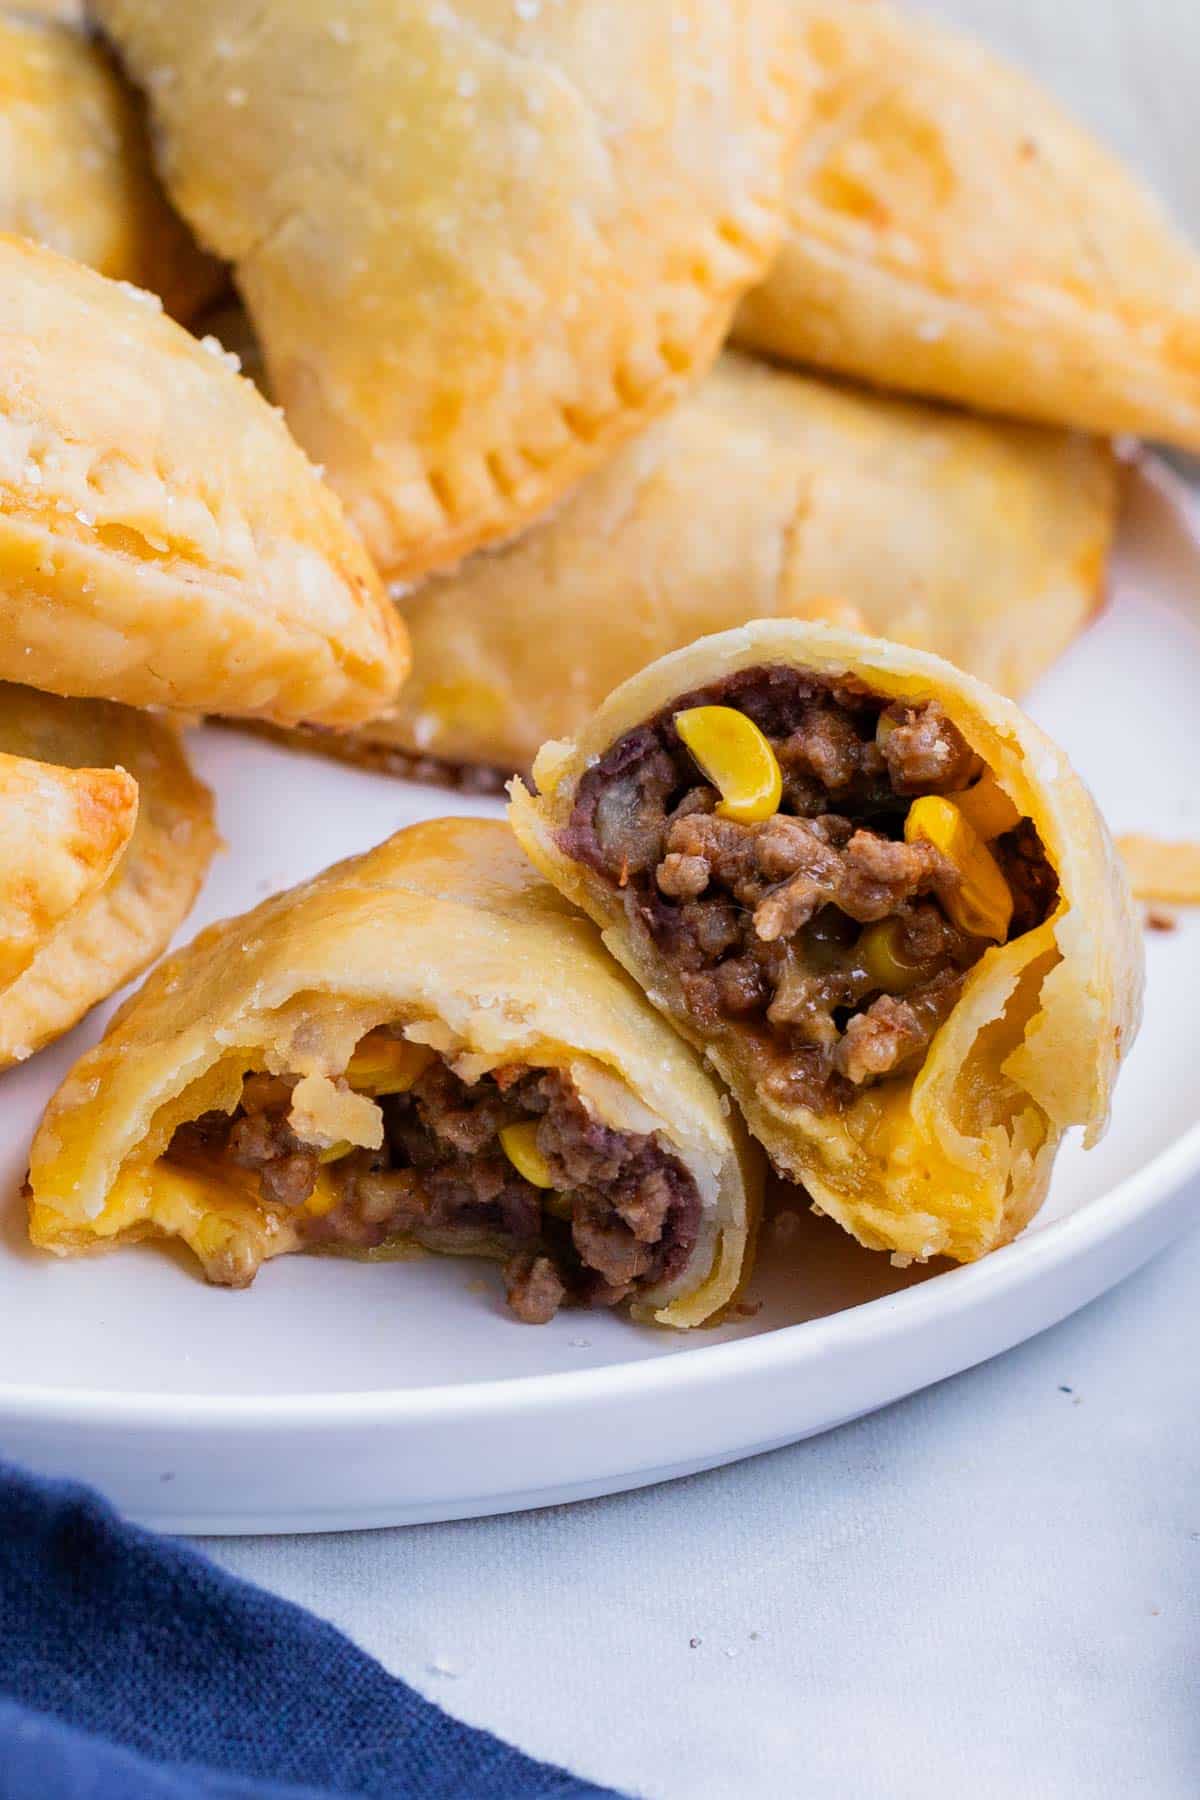 A beef empanada is cut in half to see the filling.